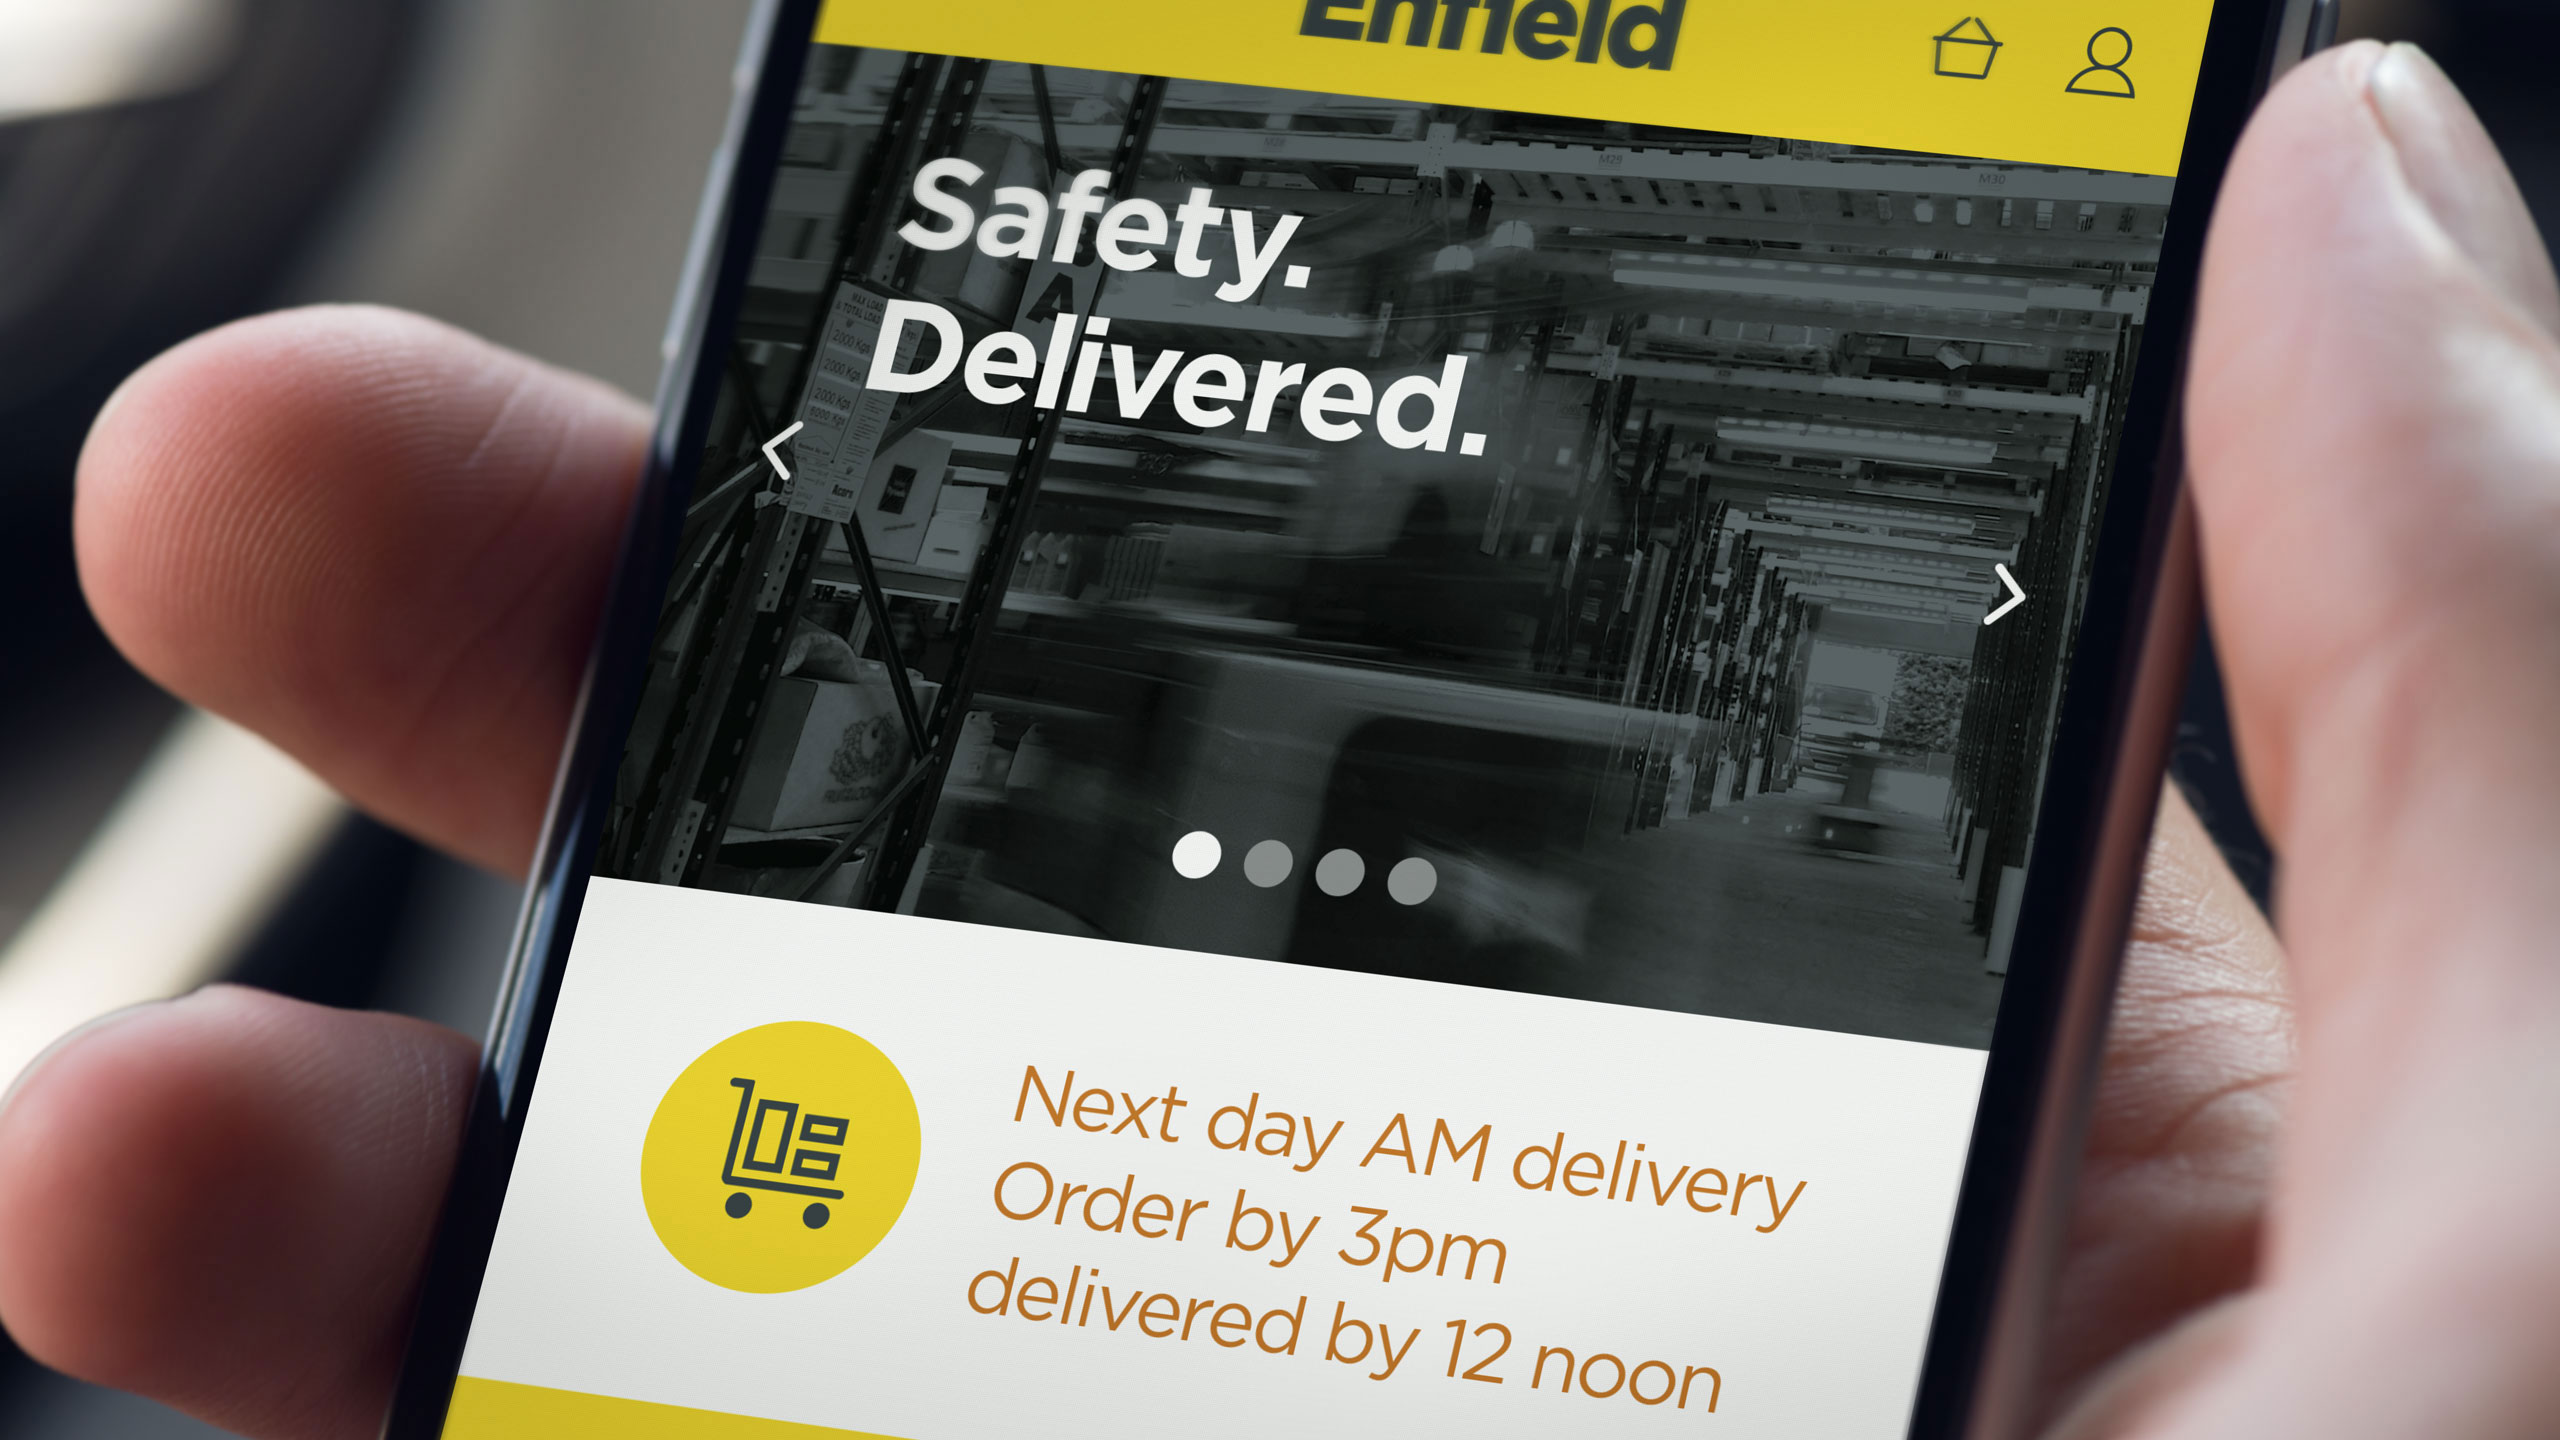 Enfield Safety Mobile Website